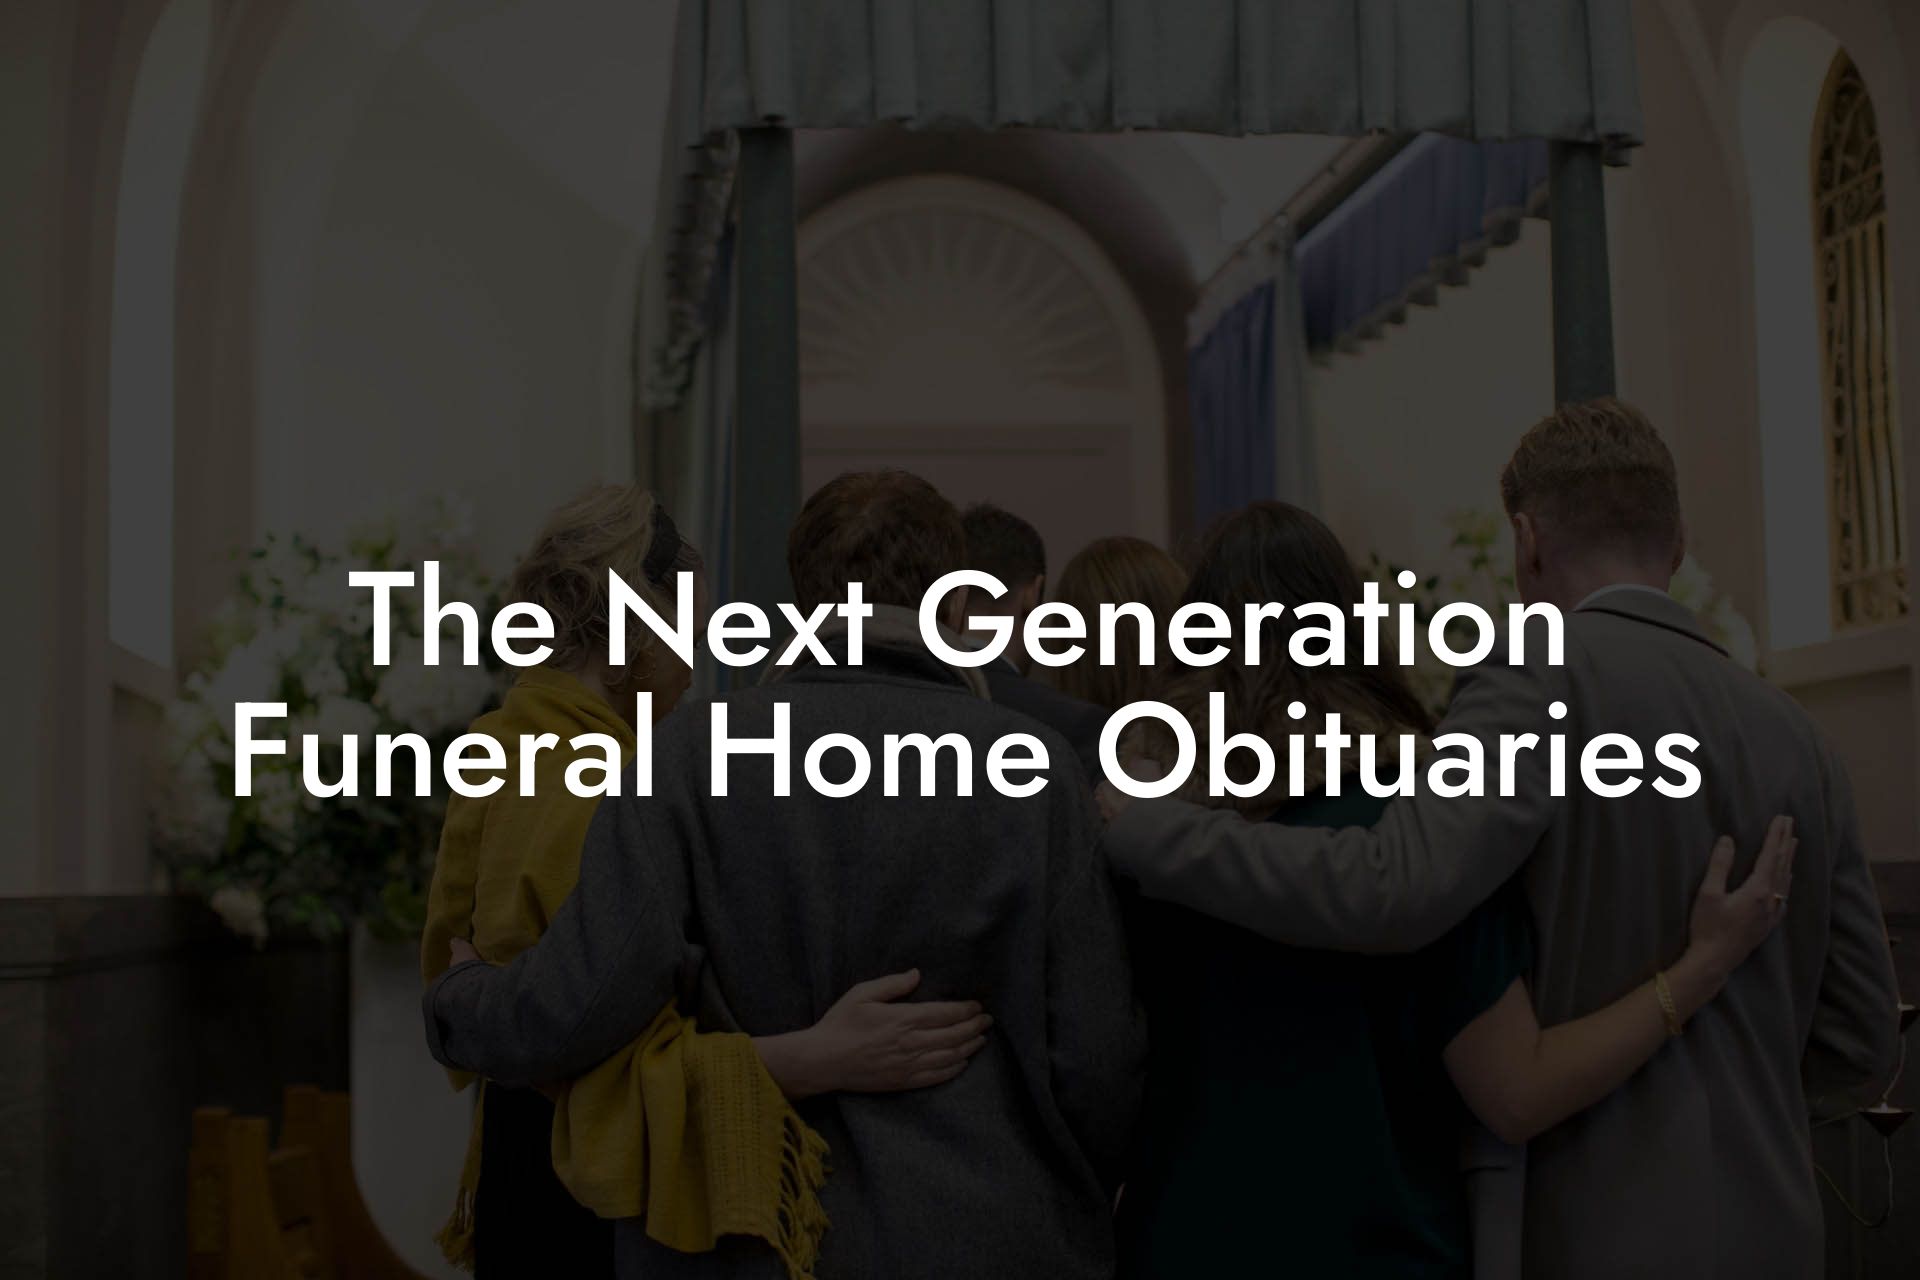 The Next Generation Funeral Home Obituaries